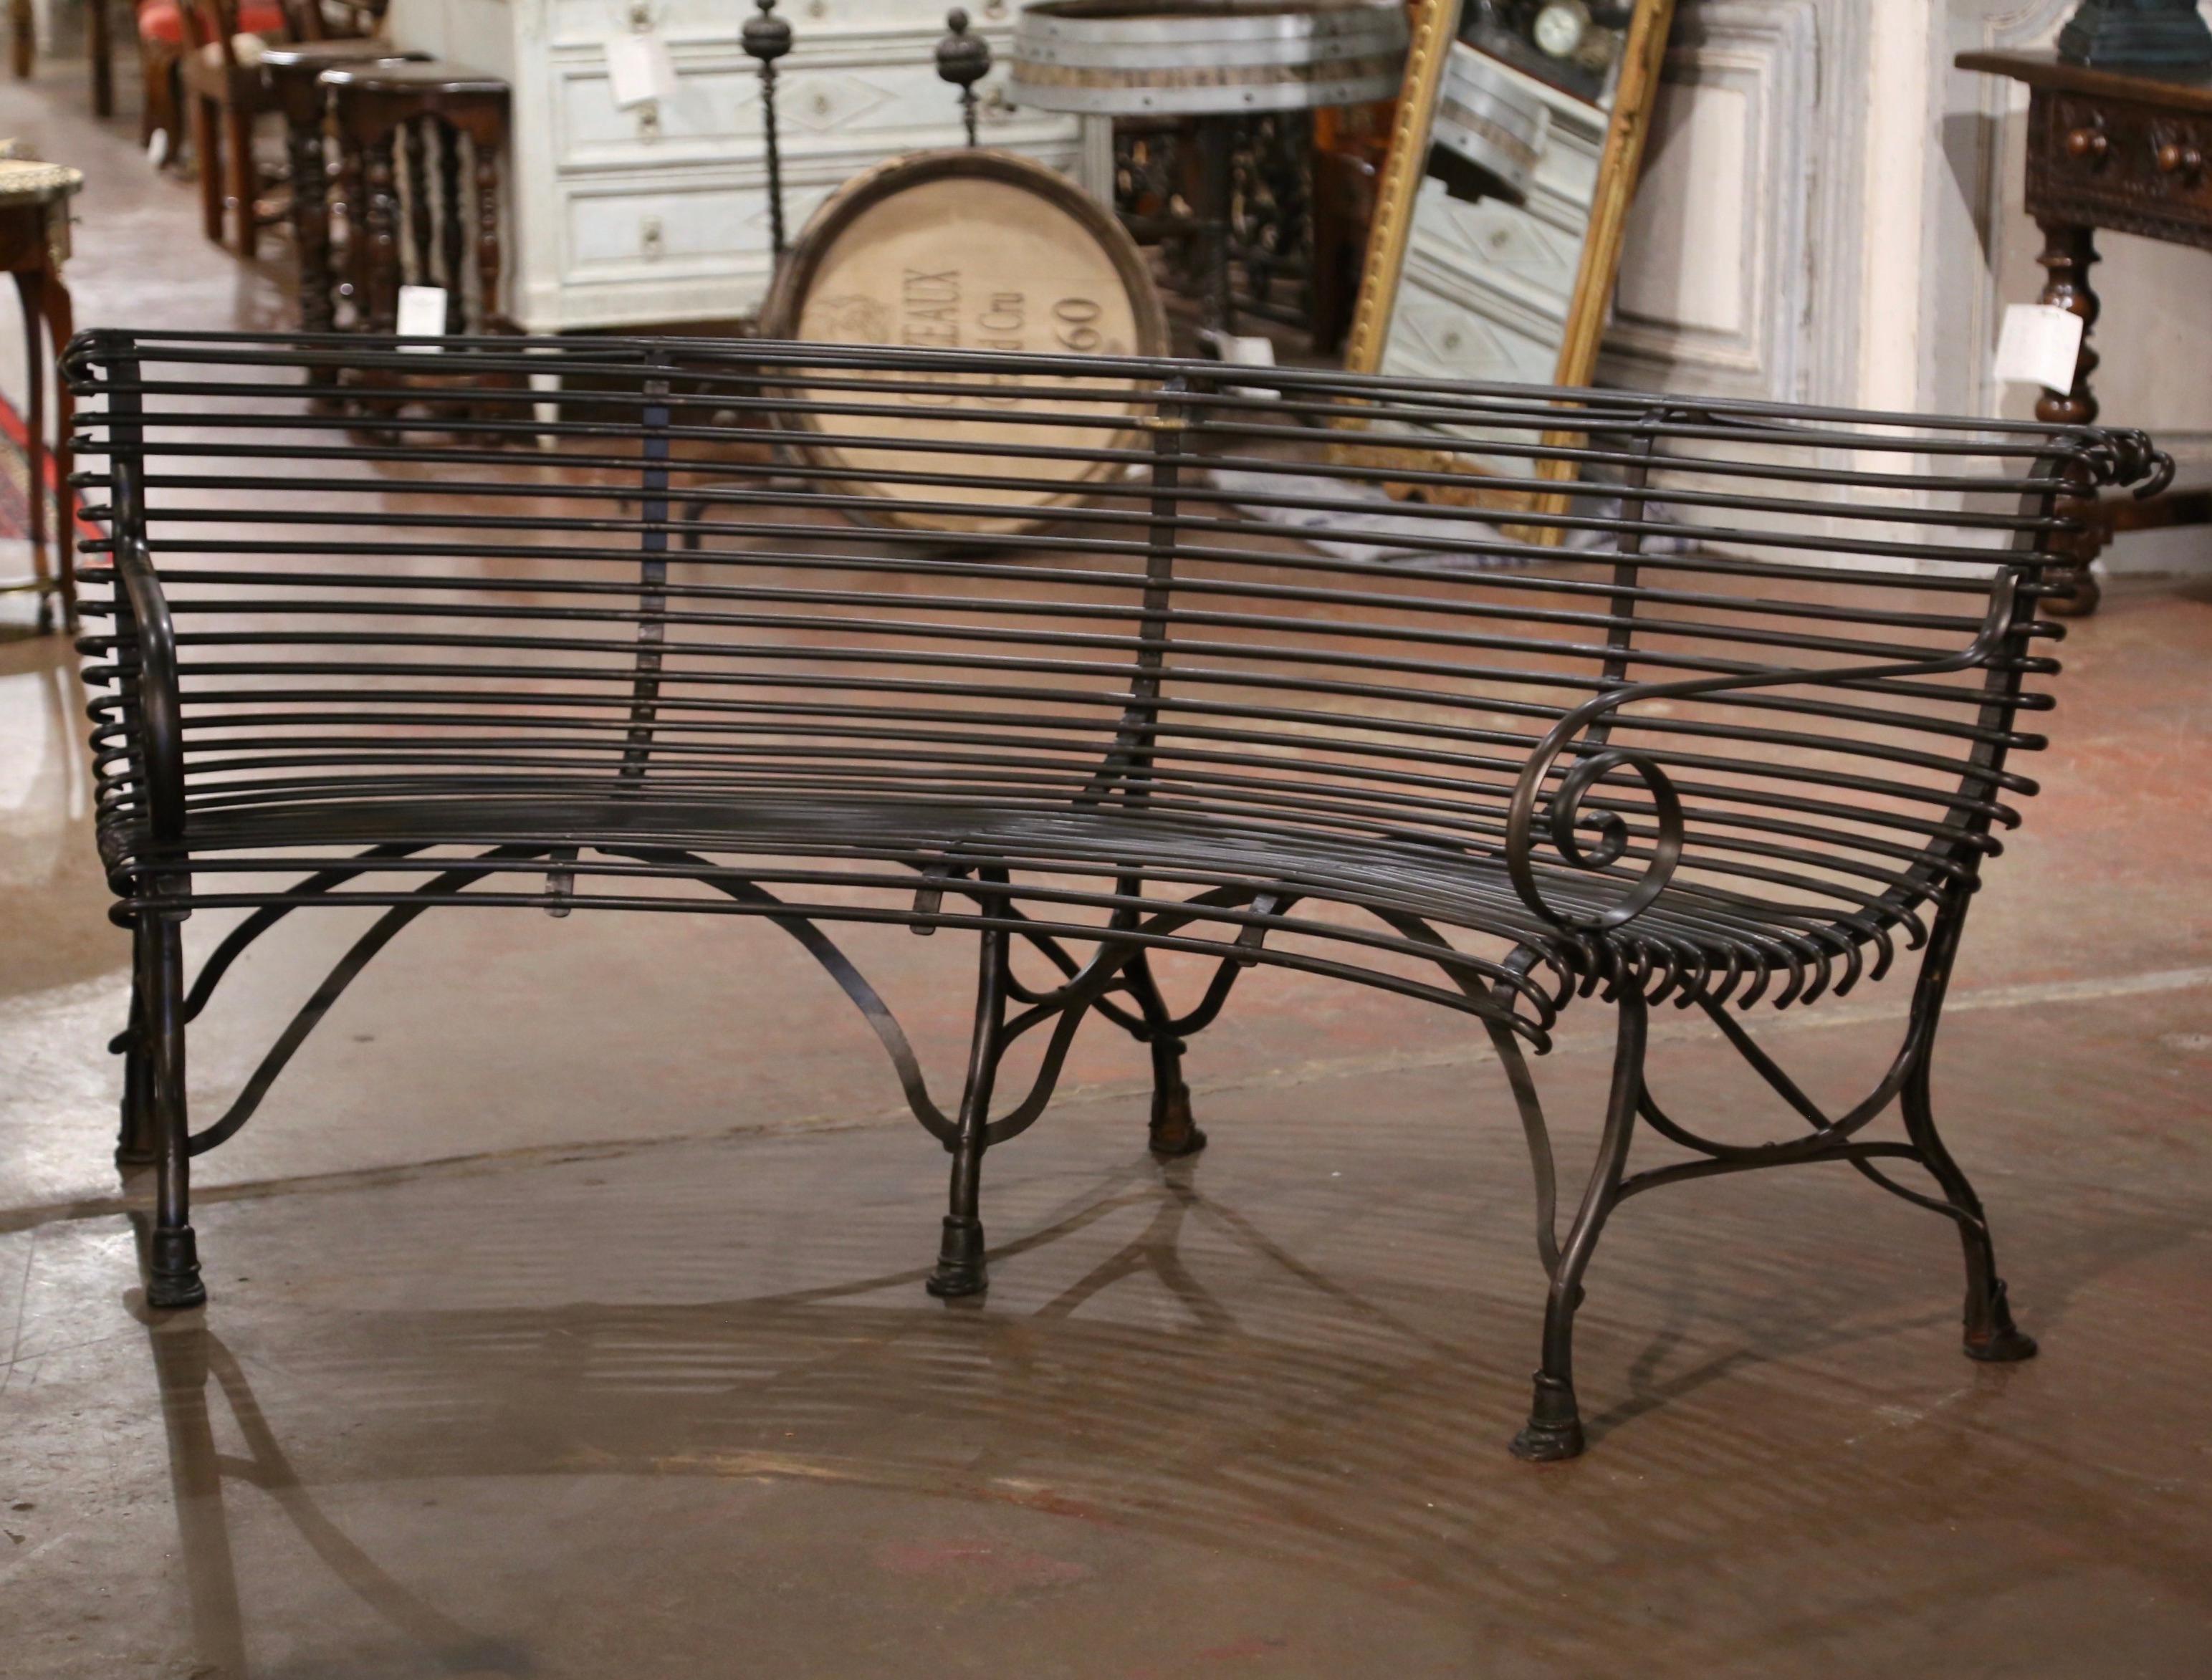 This elegant forged iron bench was crafted in France. The rounded bench stands on six legs ending with hoof feet and connected with stretchers at the base. The seating has gracious lines, scrolled armrests, and a curved back; the comfortable